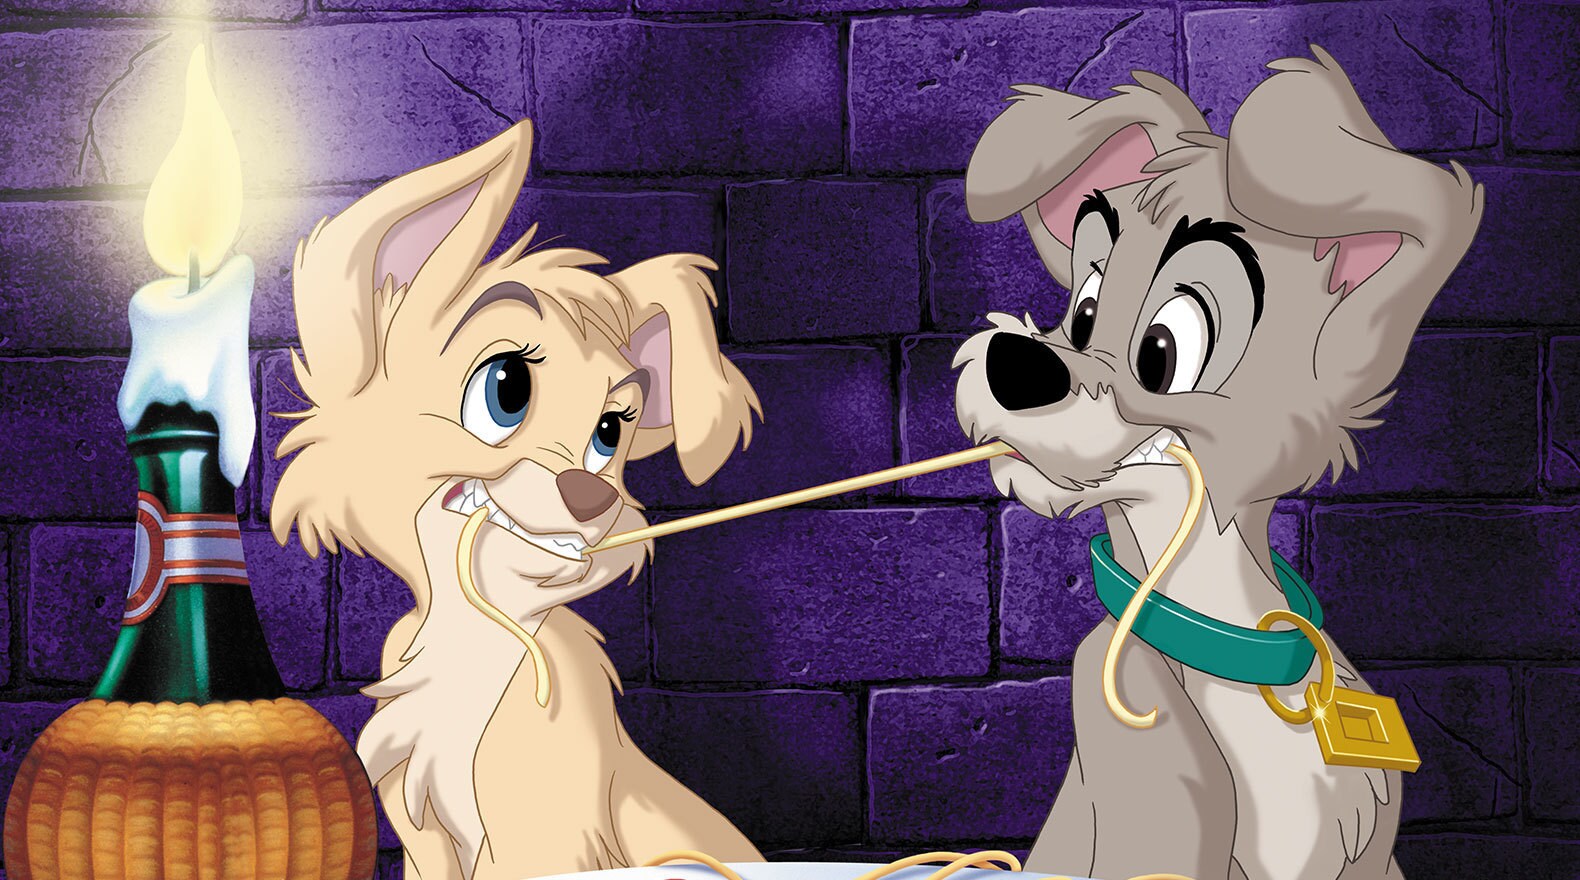 Scamp and Angel share a spaghetti noodle